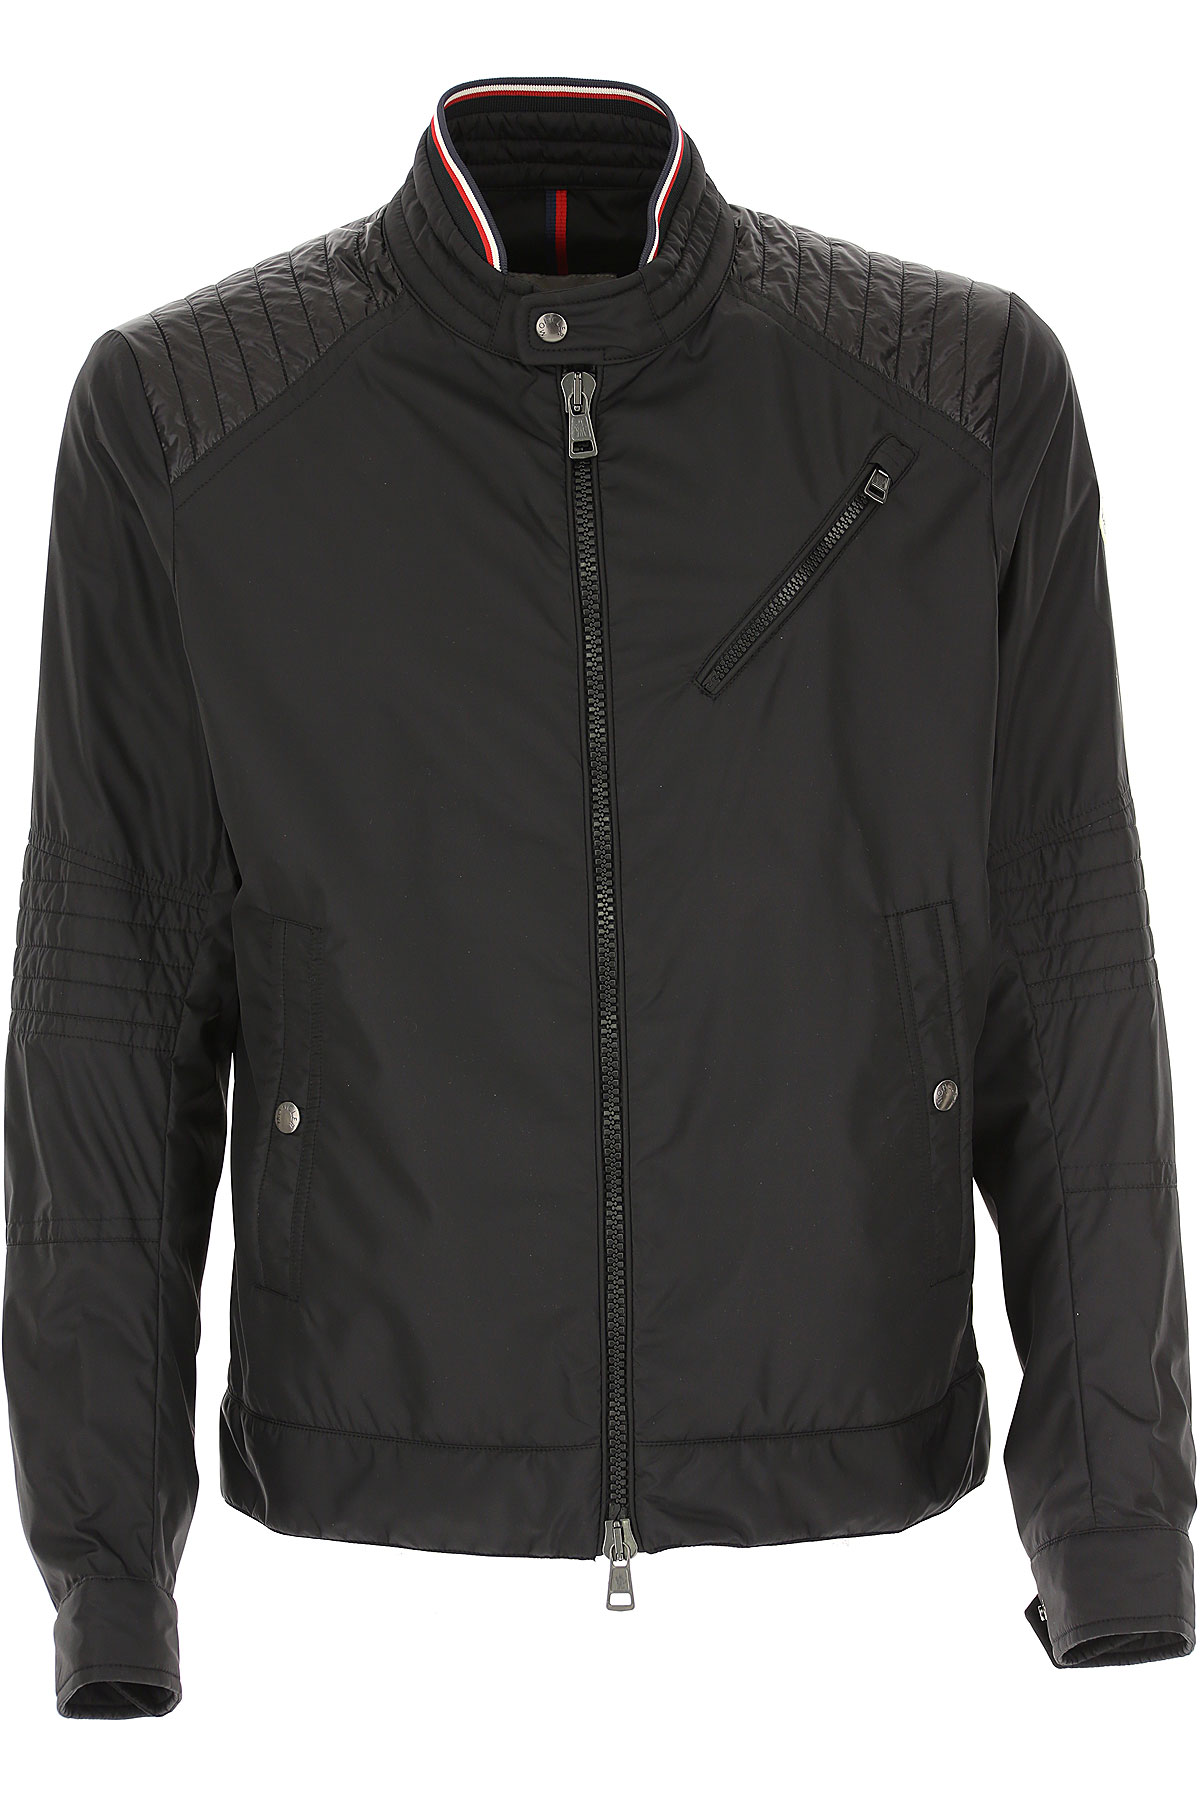 Mens Clothing Moncler, Style code: 401278568352-999-premont